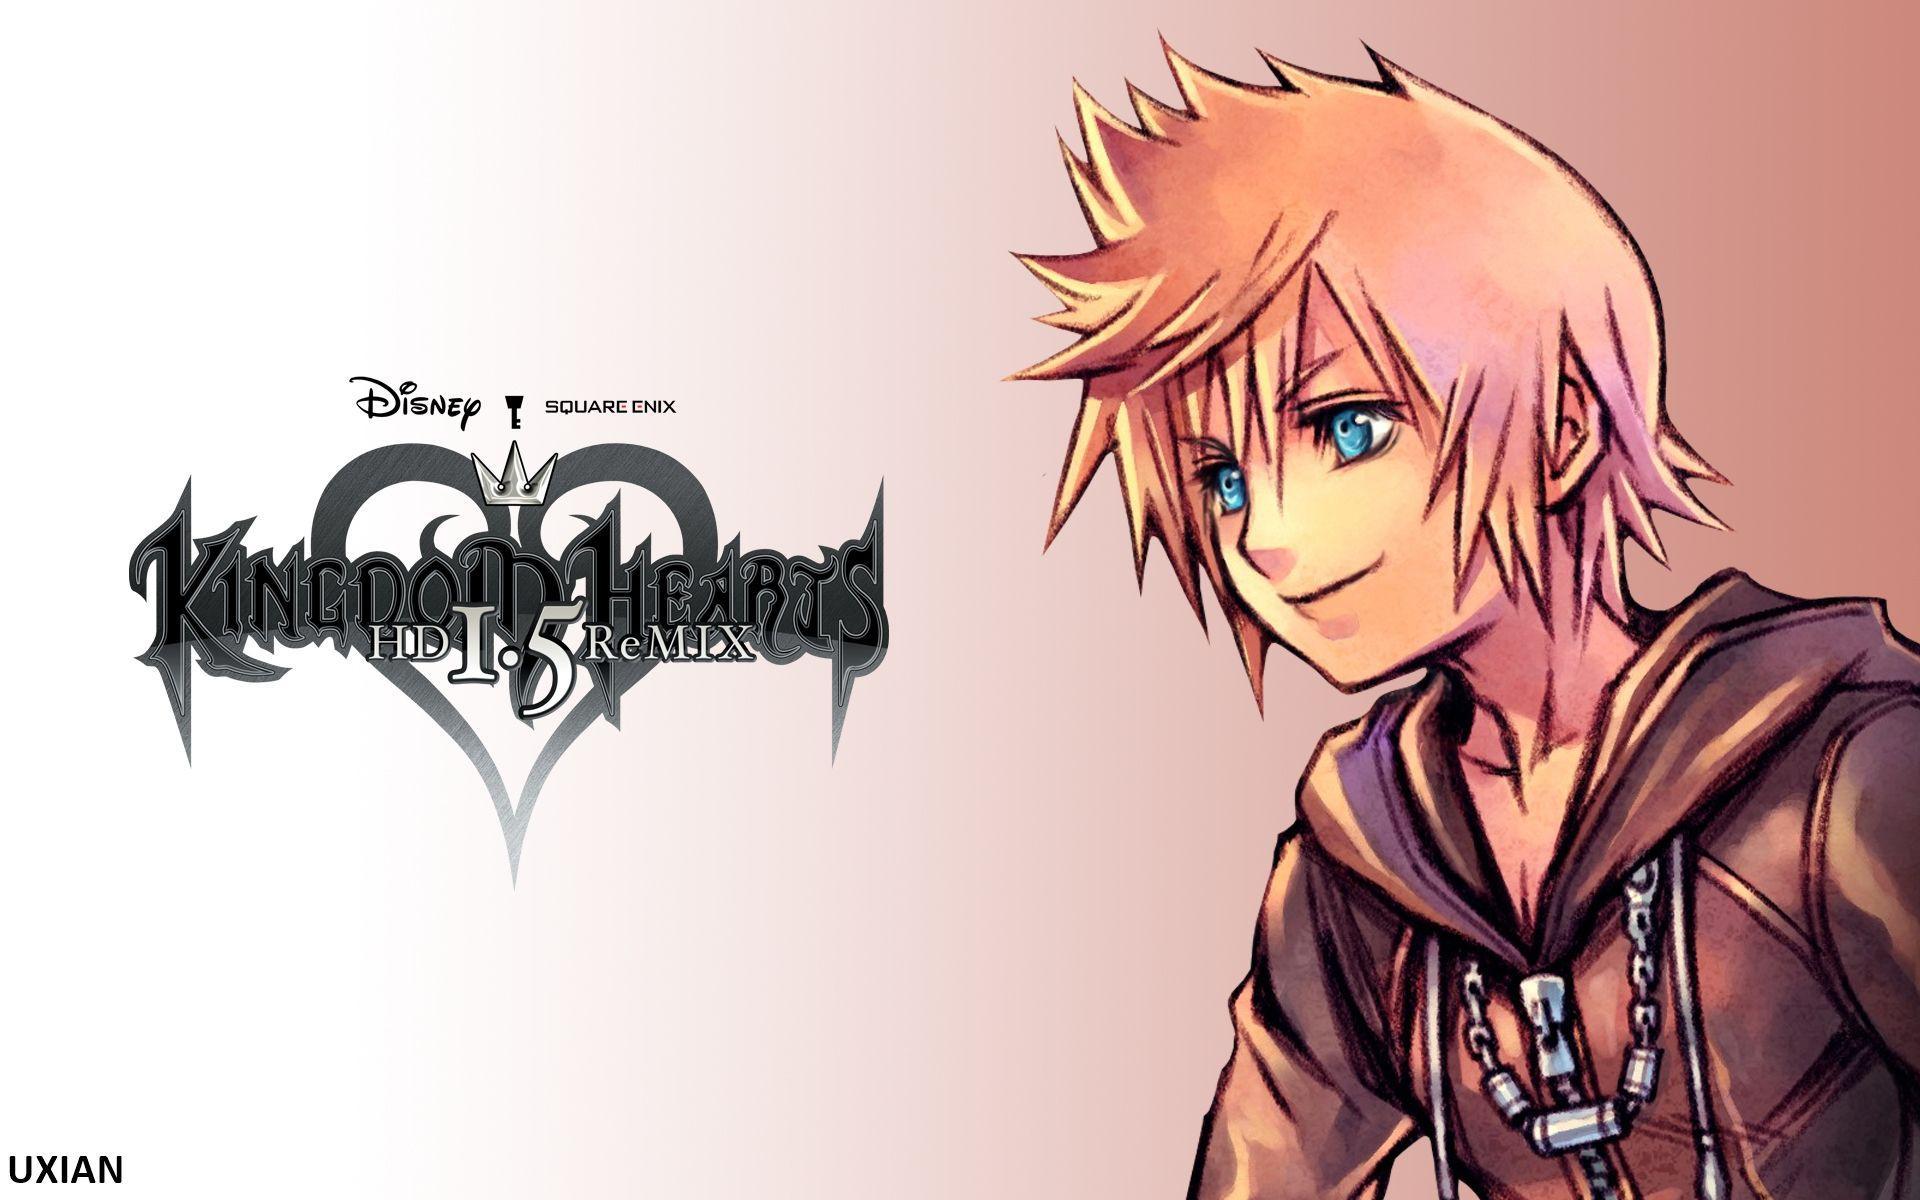 image For > Kingdom Hearts Roxas And Xion Wallpaper